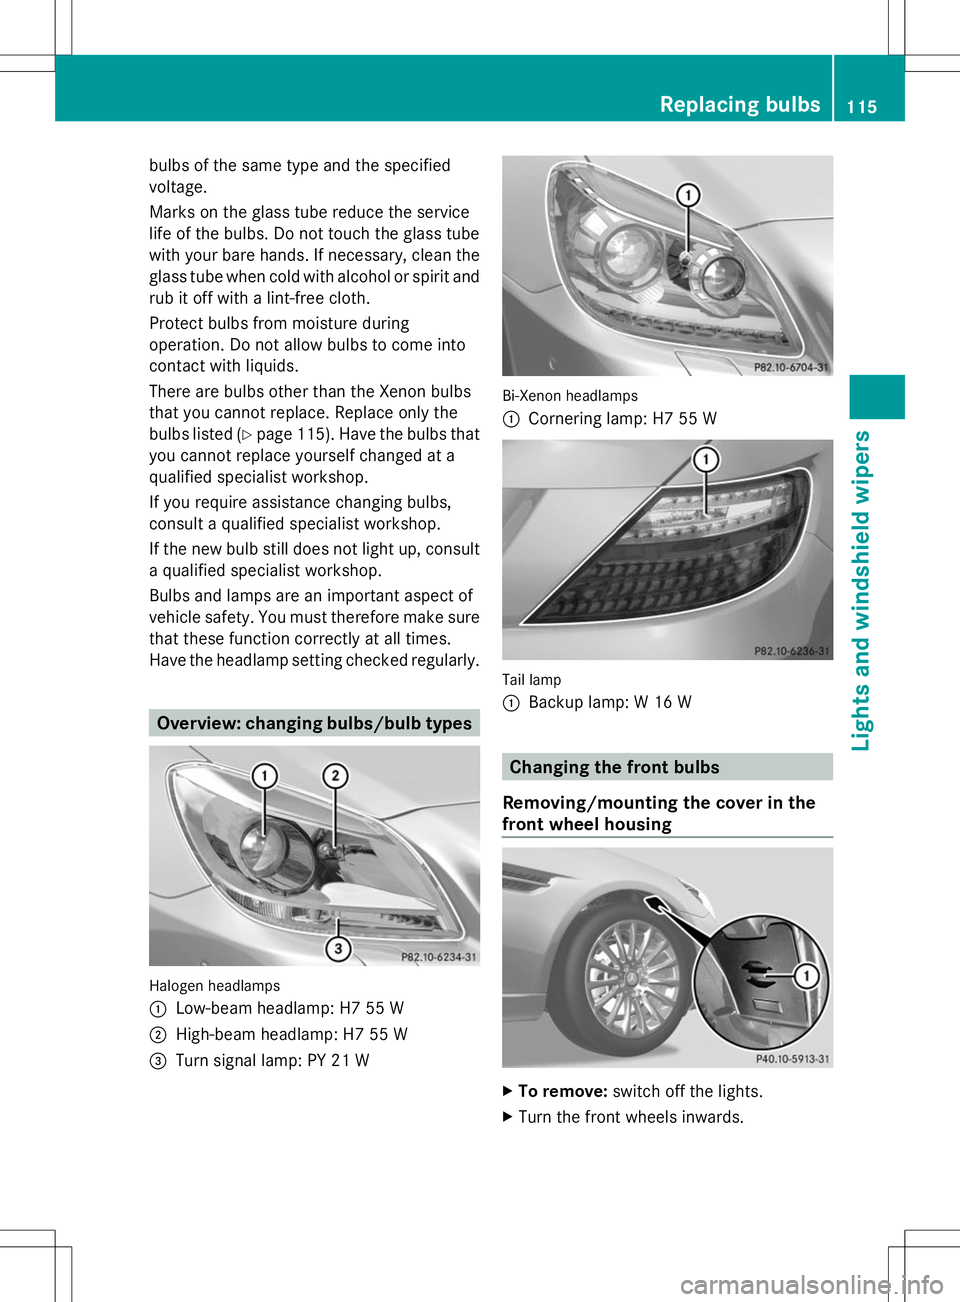 MERCEDES-BENZ SLK-CLASS ROADSTER 2014  Owners Manual bulbs of the same type and the specified
voltage.
Marks on the glass tube reduce the service
life of the bulbs. Do not touch the glass tube
with your bare hands. If necessary, clean the
glass tube whe